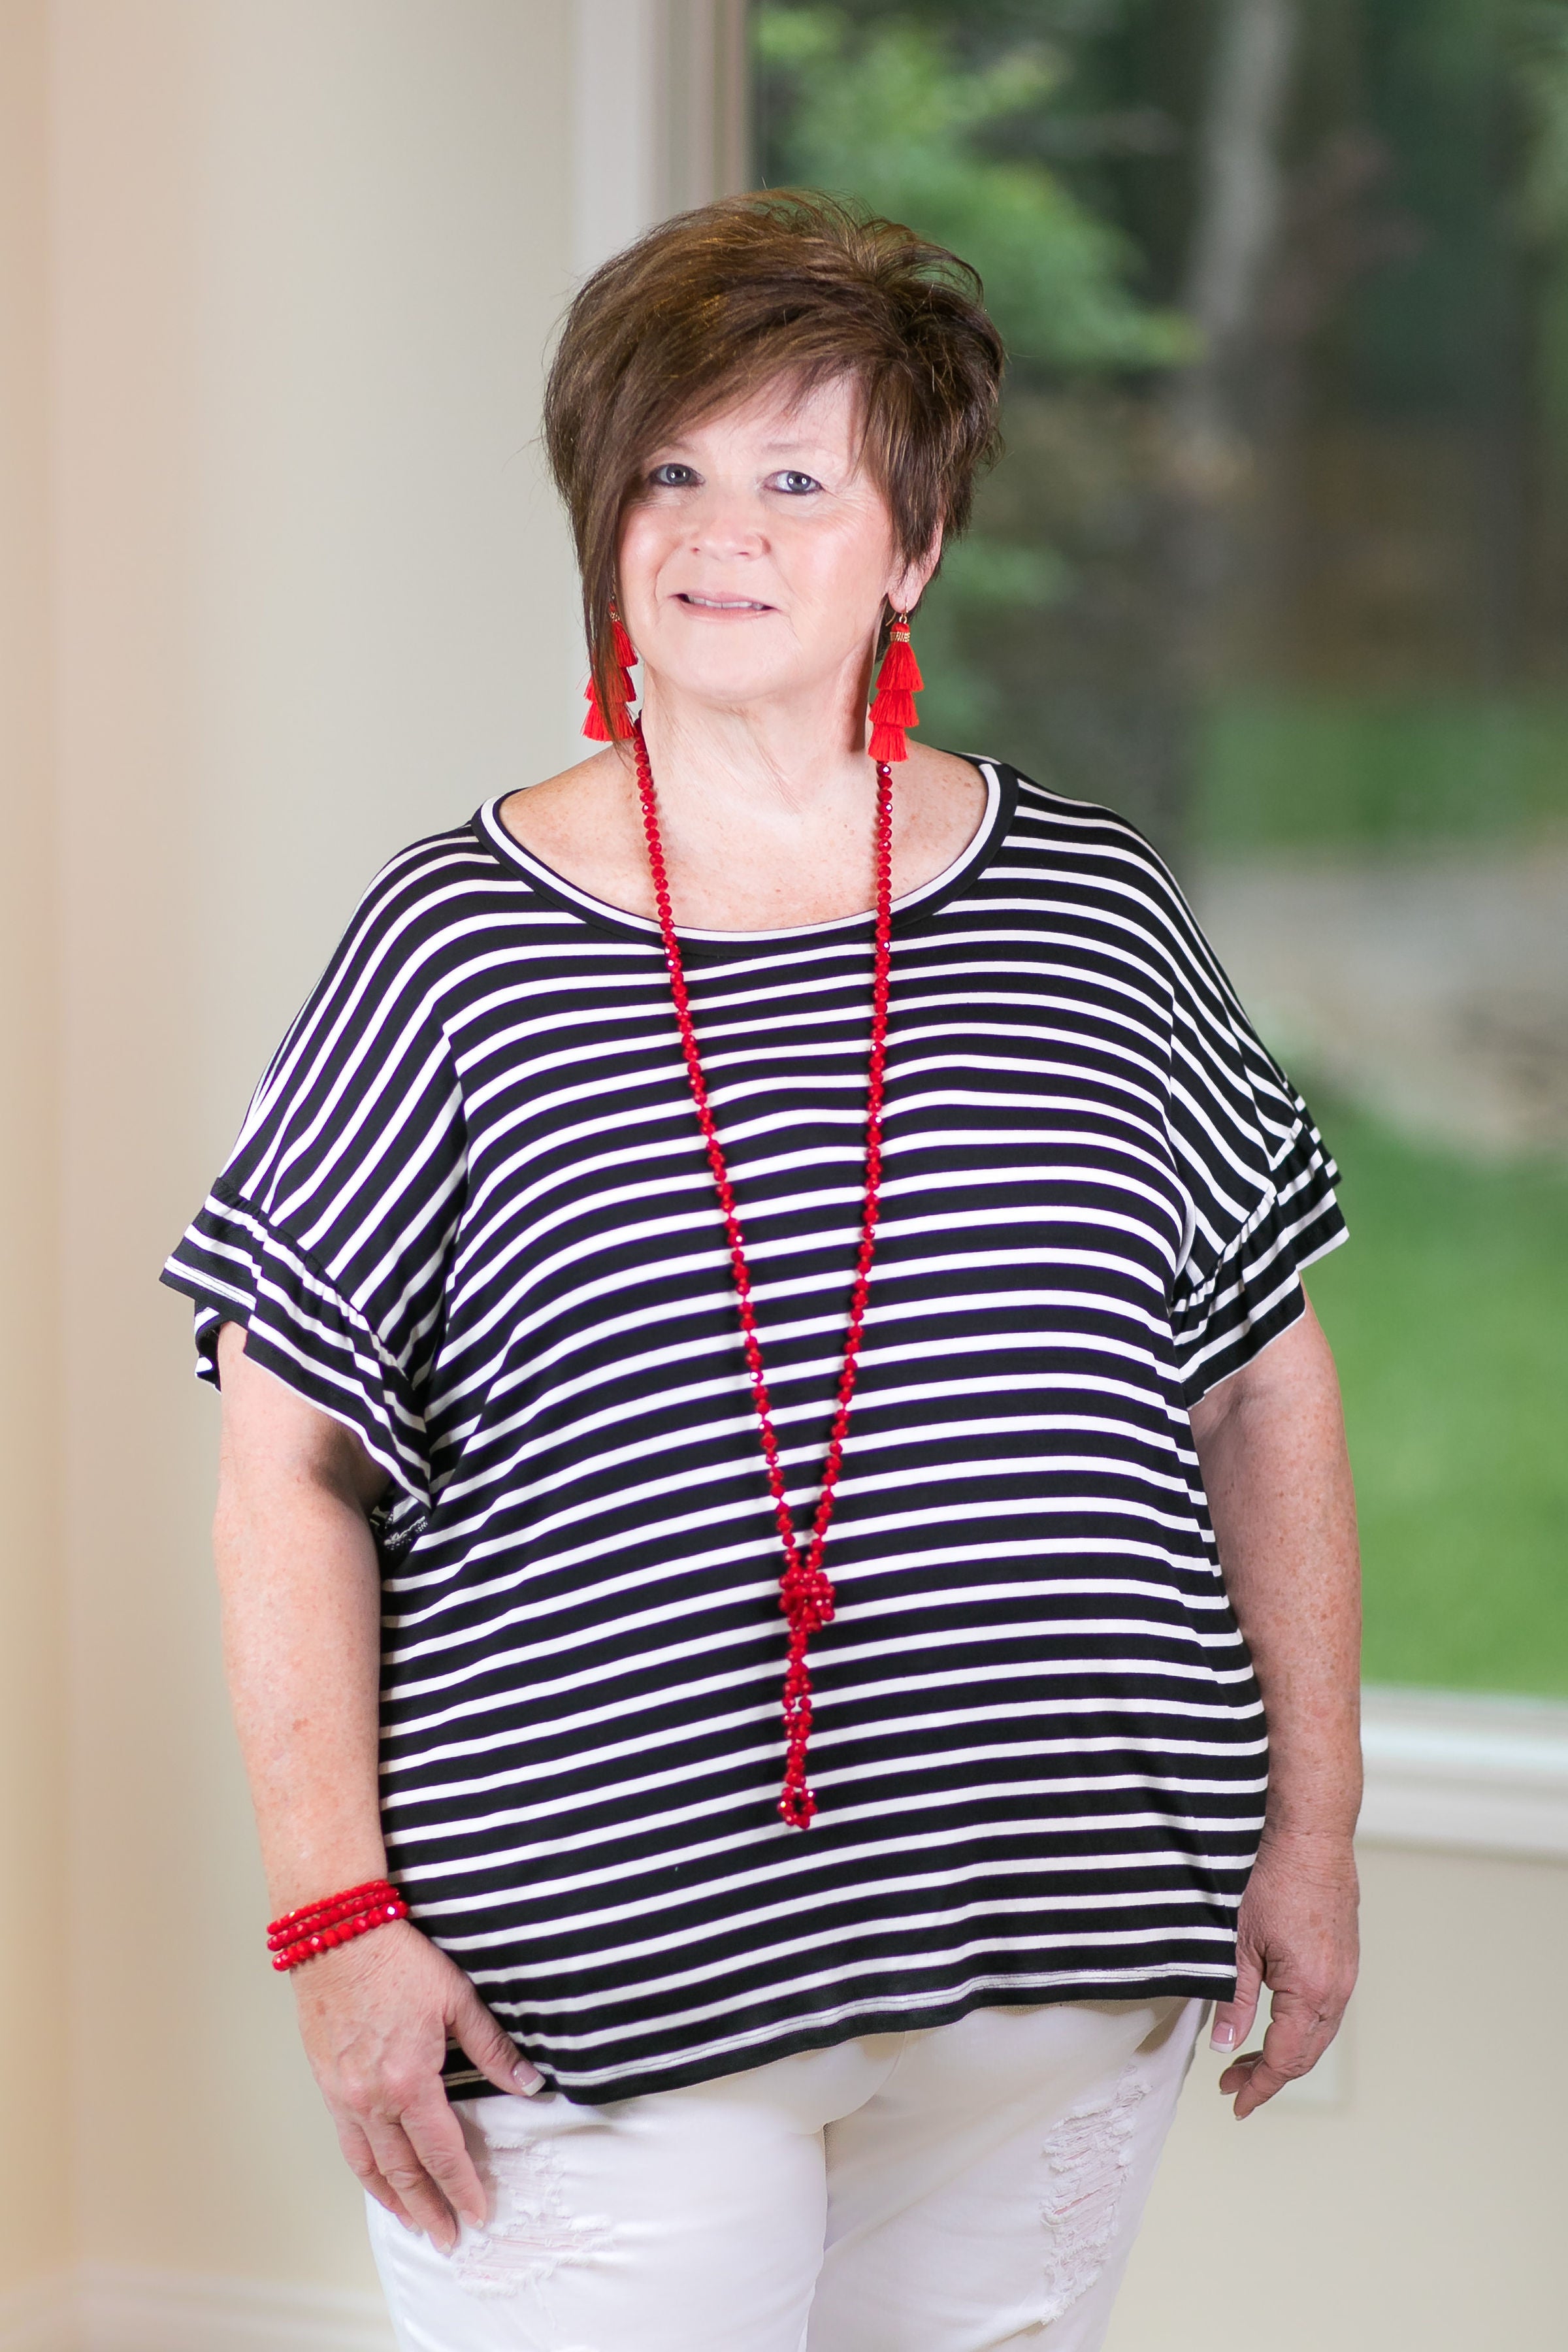 Plus Size | Leading Lines Stripe Top with Ruffle Sleeves in Black - Giddy Up Glamour Boutique